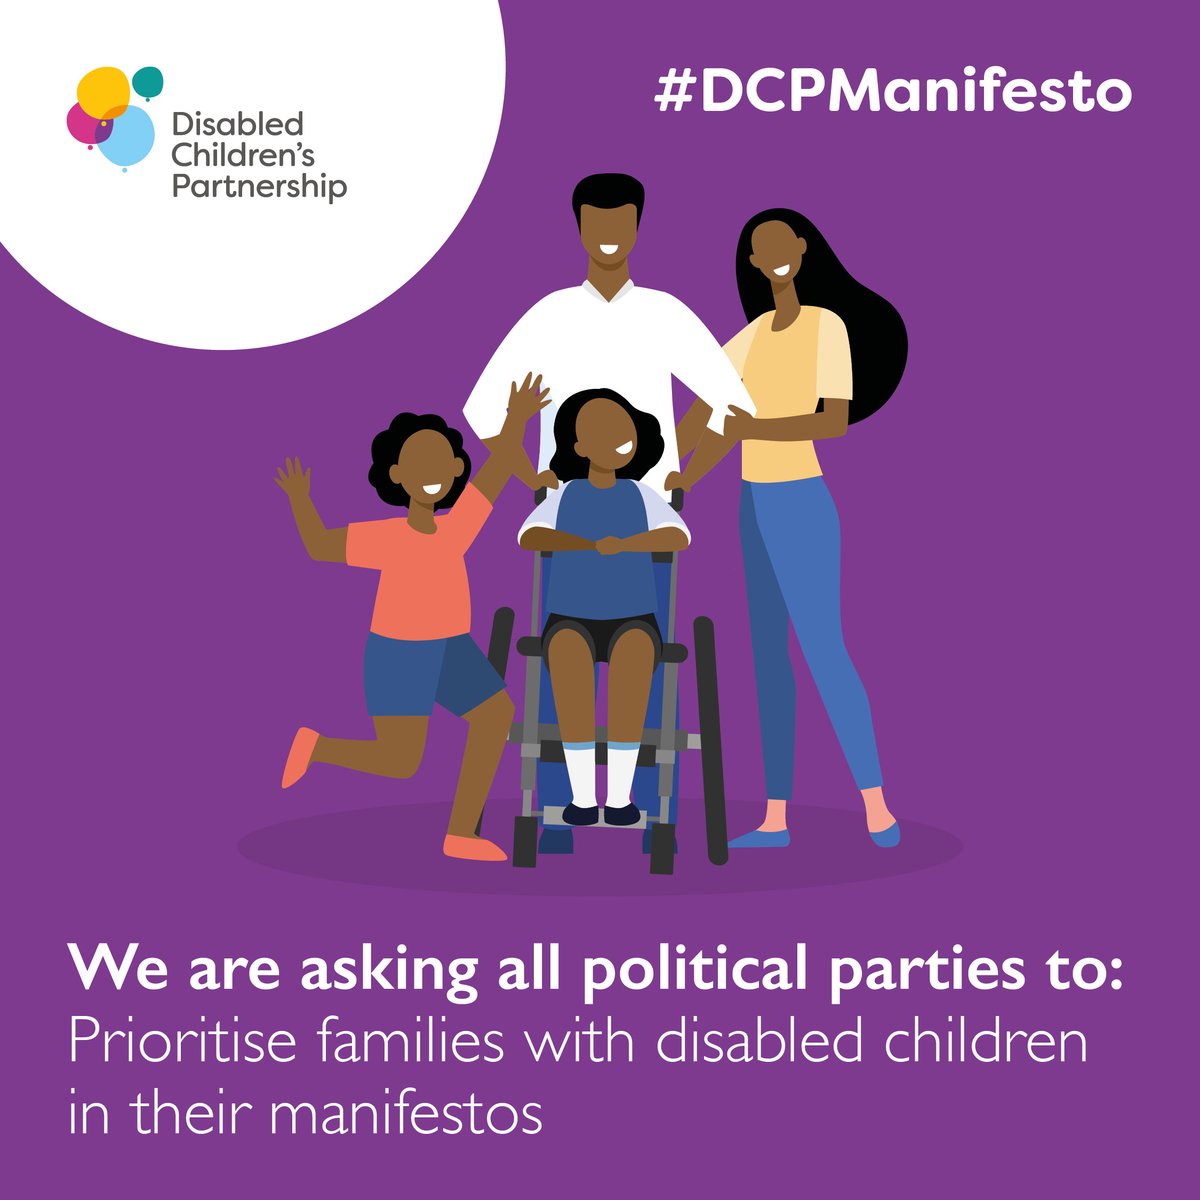 As a member of the @DCPCampaign we’re pleased to share the #DCPManifesto in the lead up to the General Election. Disabled children and their families must not be forgotten by political parties. You can find the full DCP Manifesto here: bit.ly/DCPManifesto